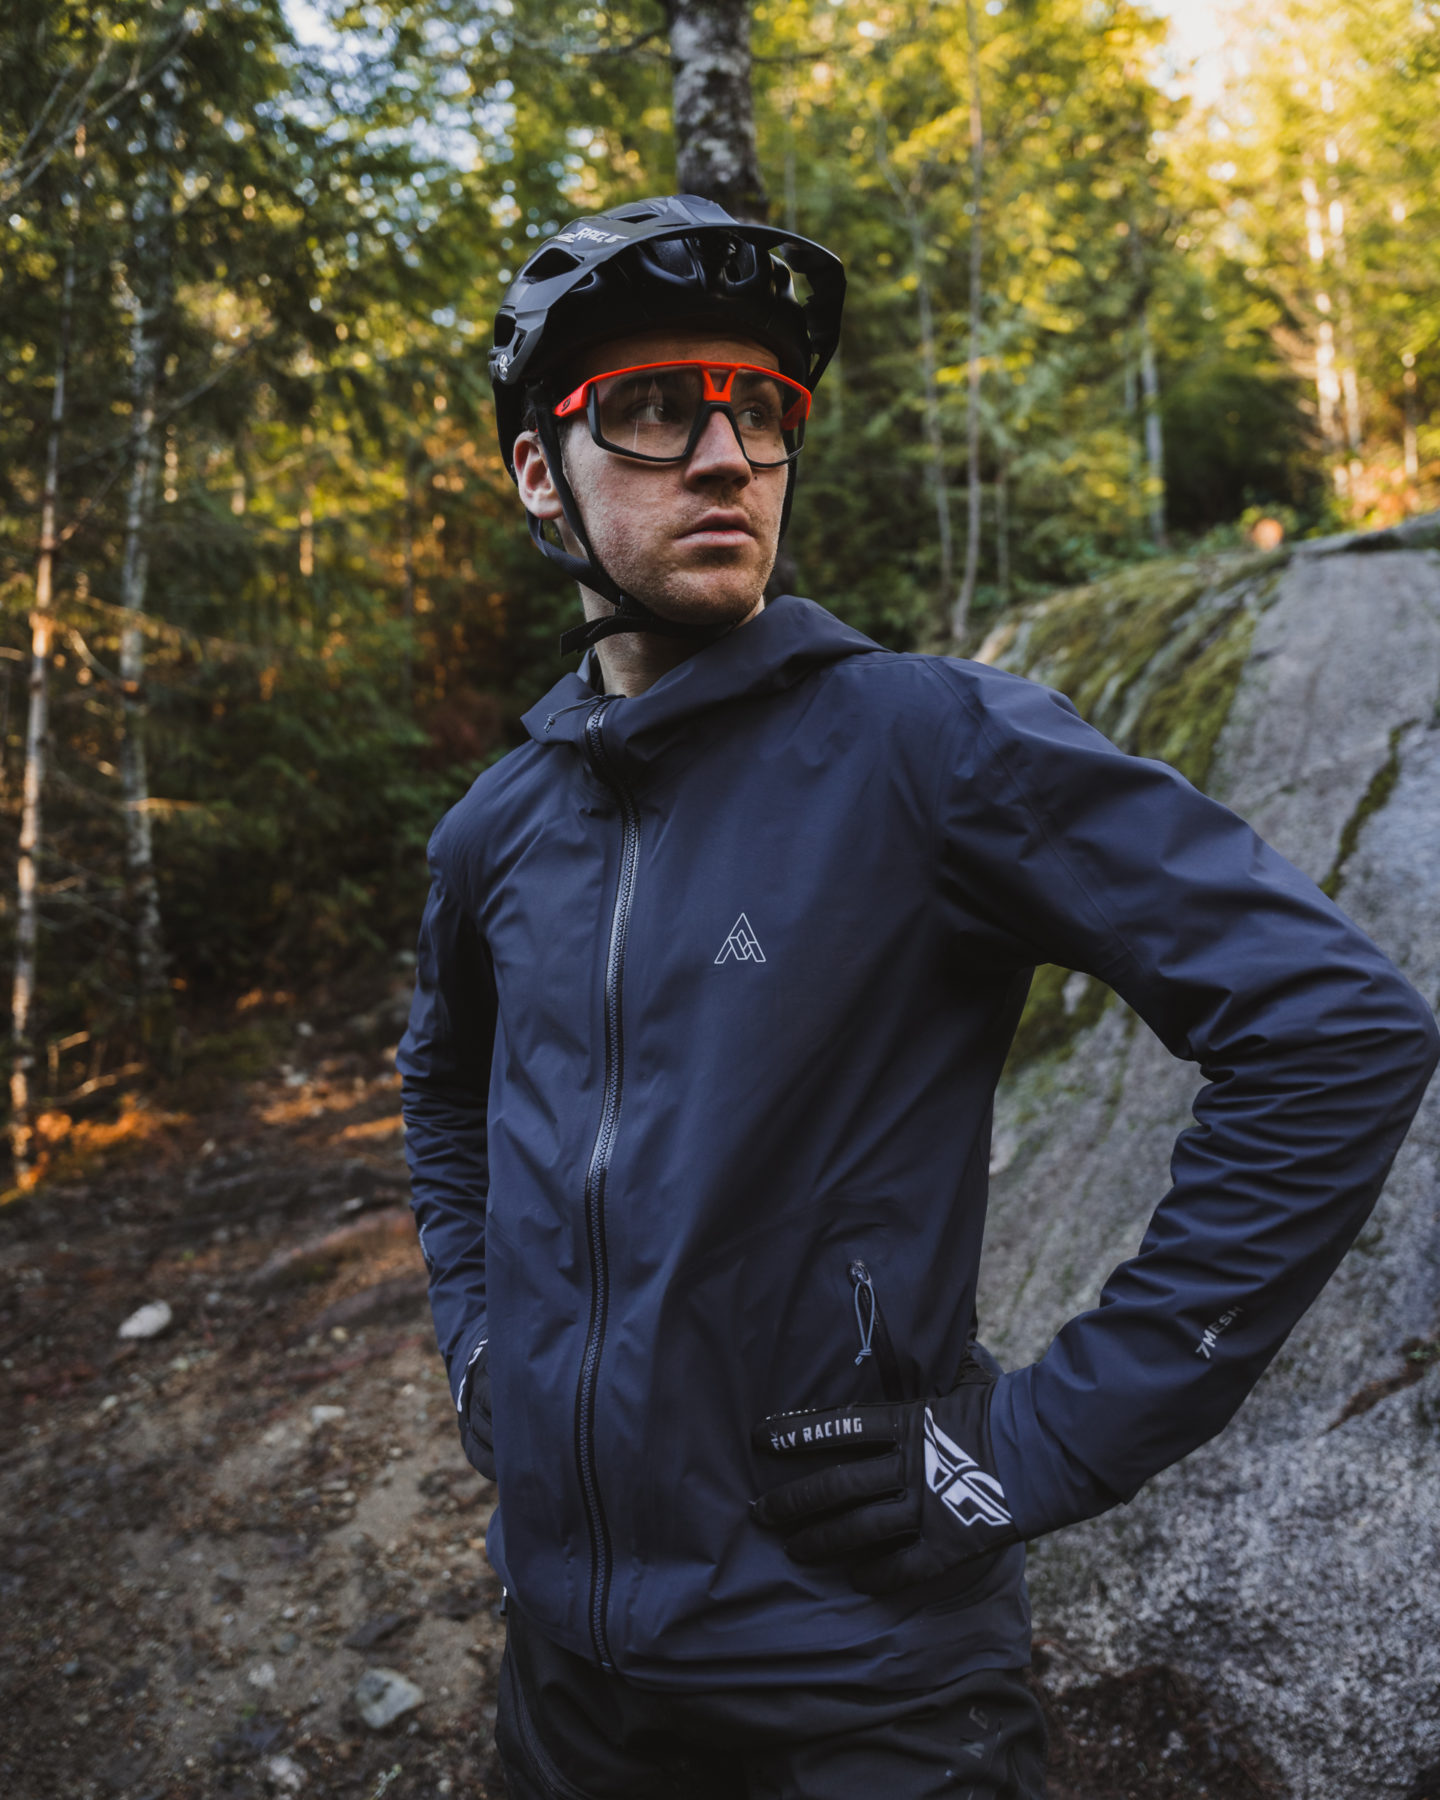 7mesh Cycling Apparel partners with Rémy Métailler – One Track